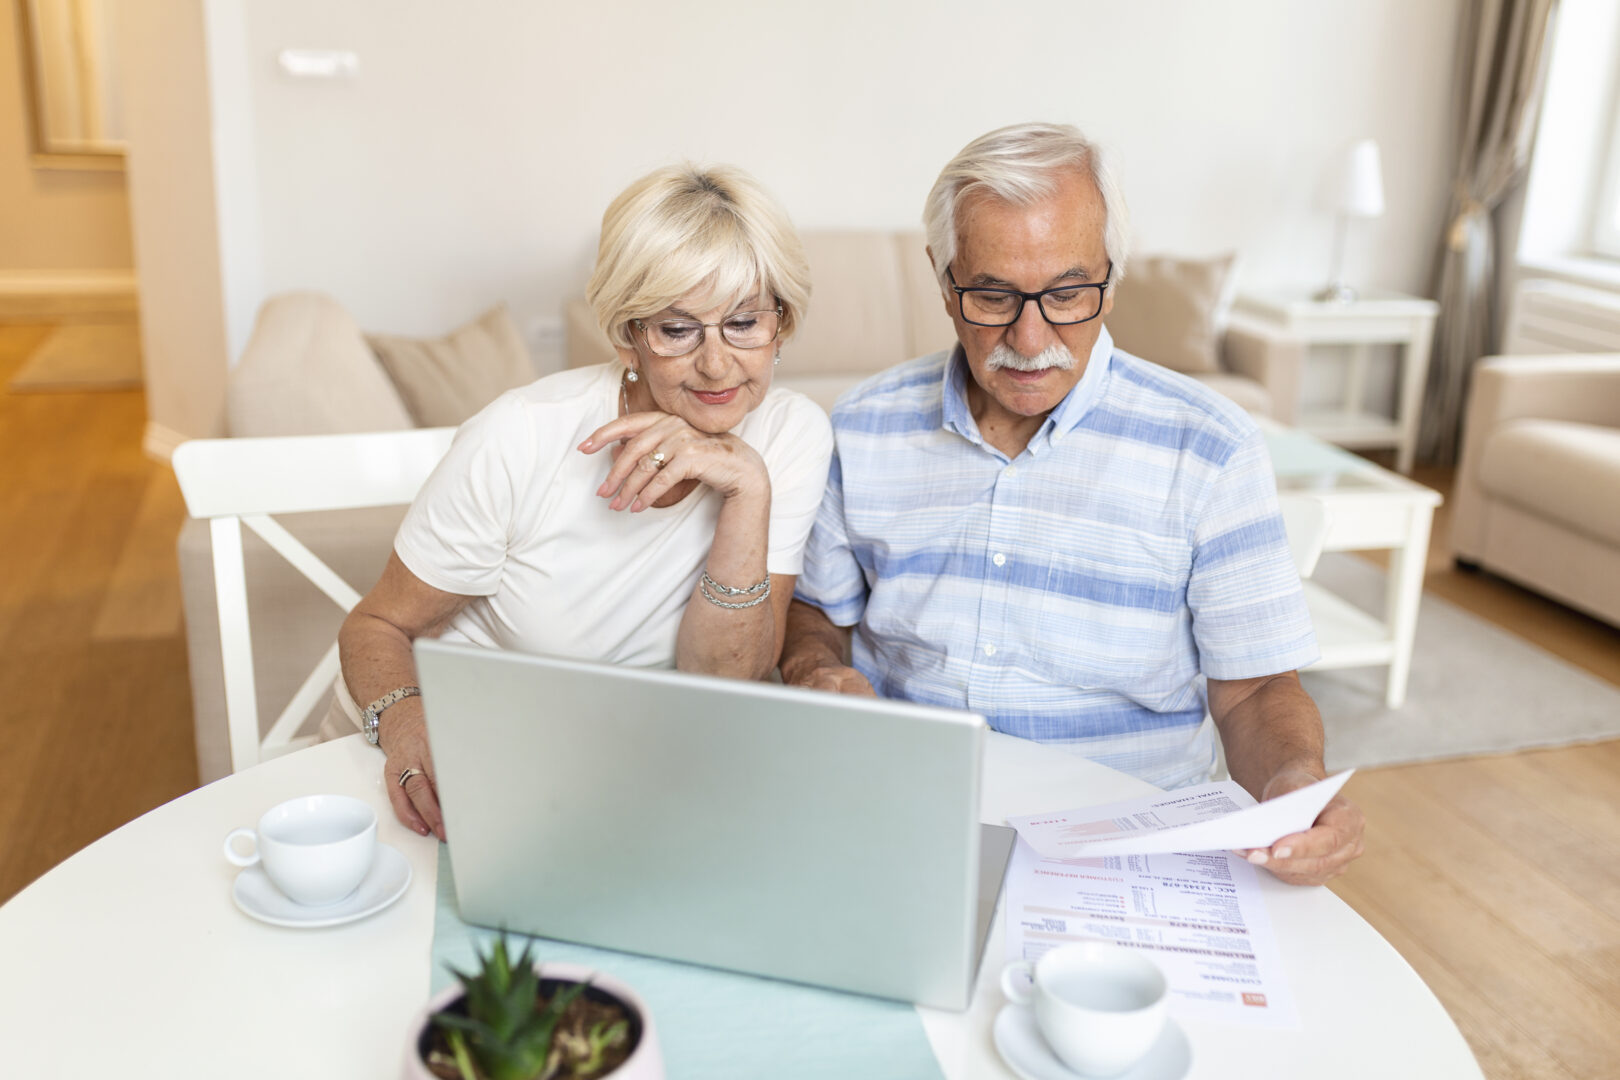 What documents do you need to prepare for aged care?